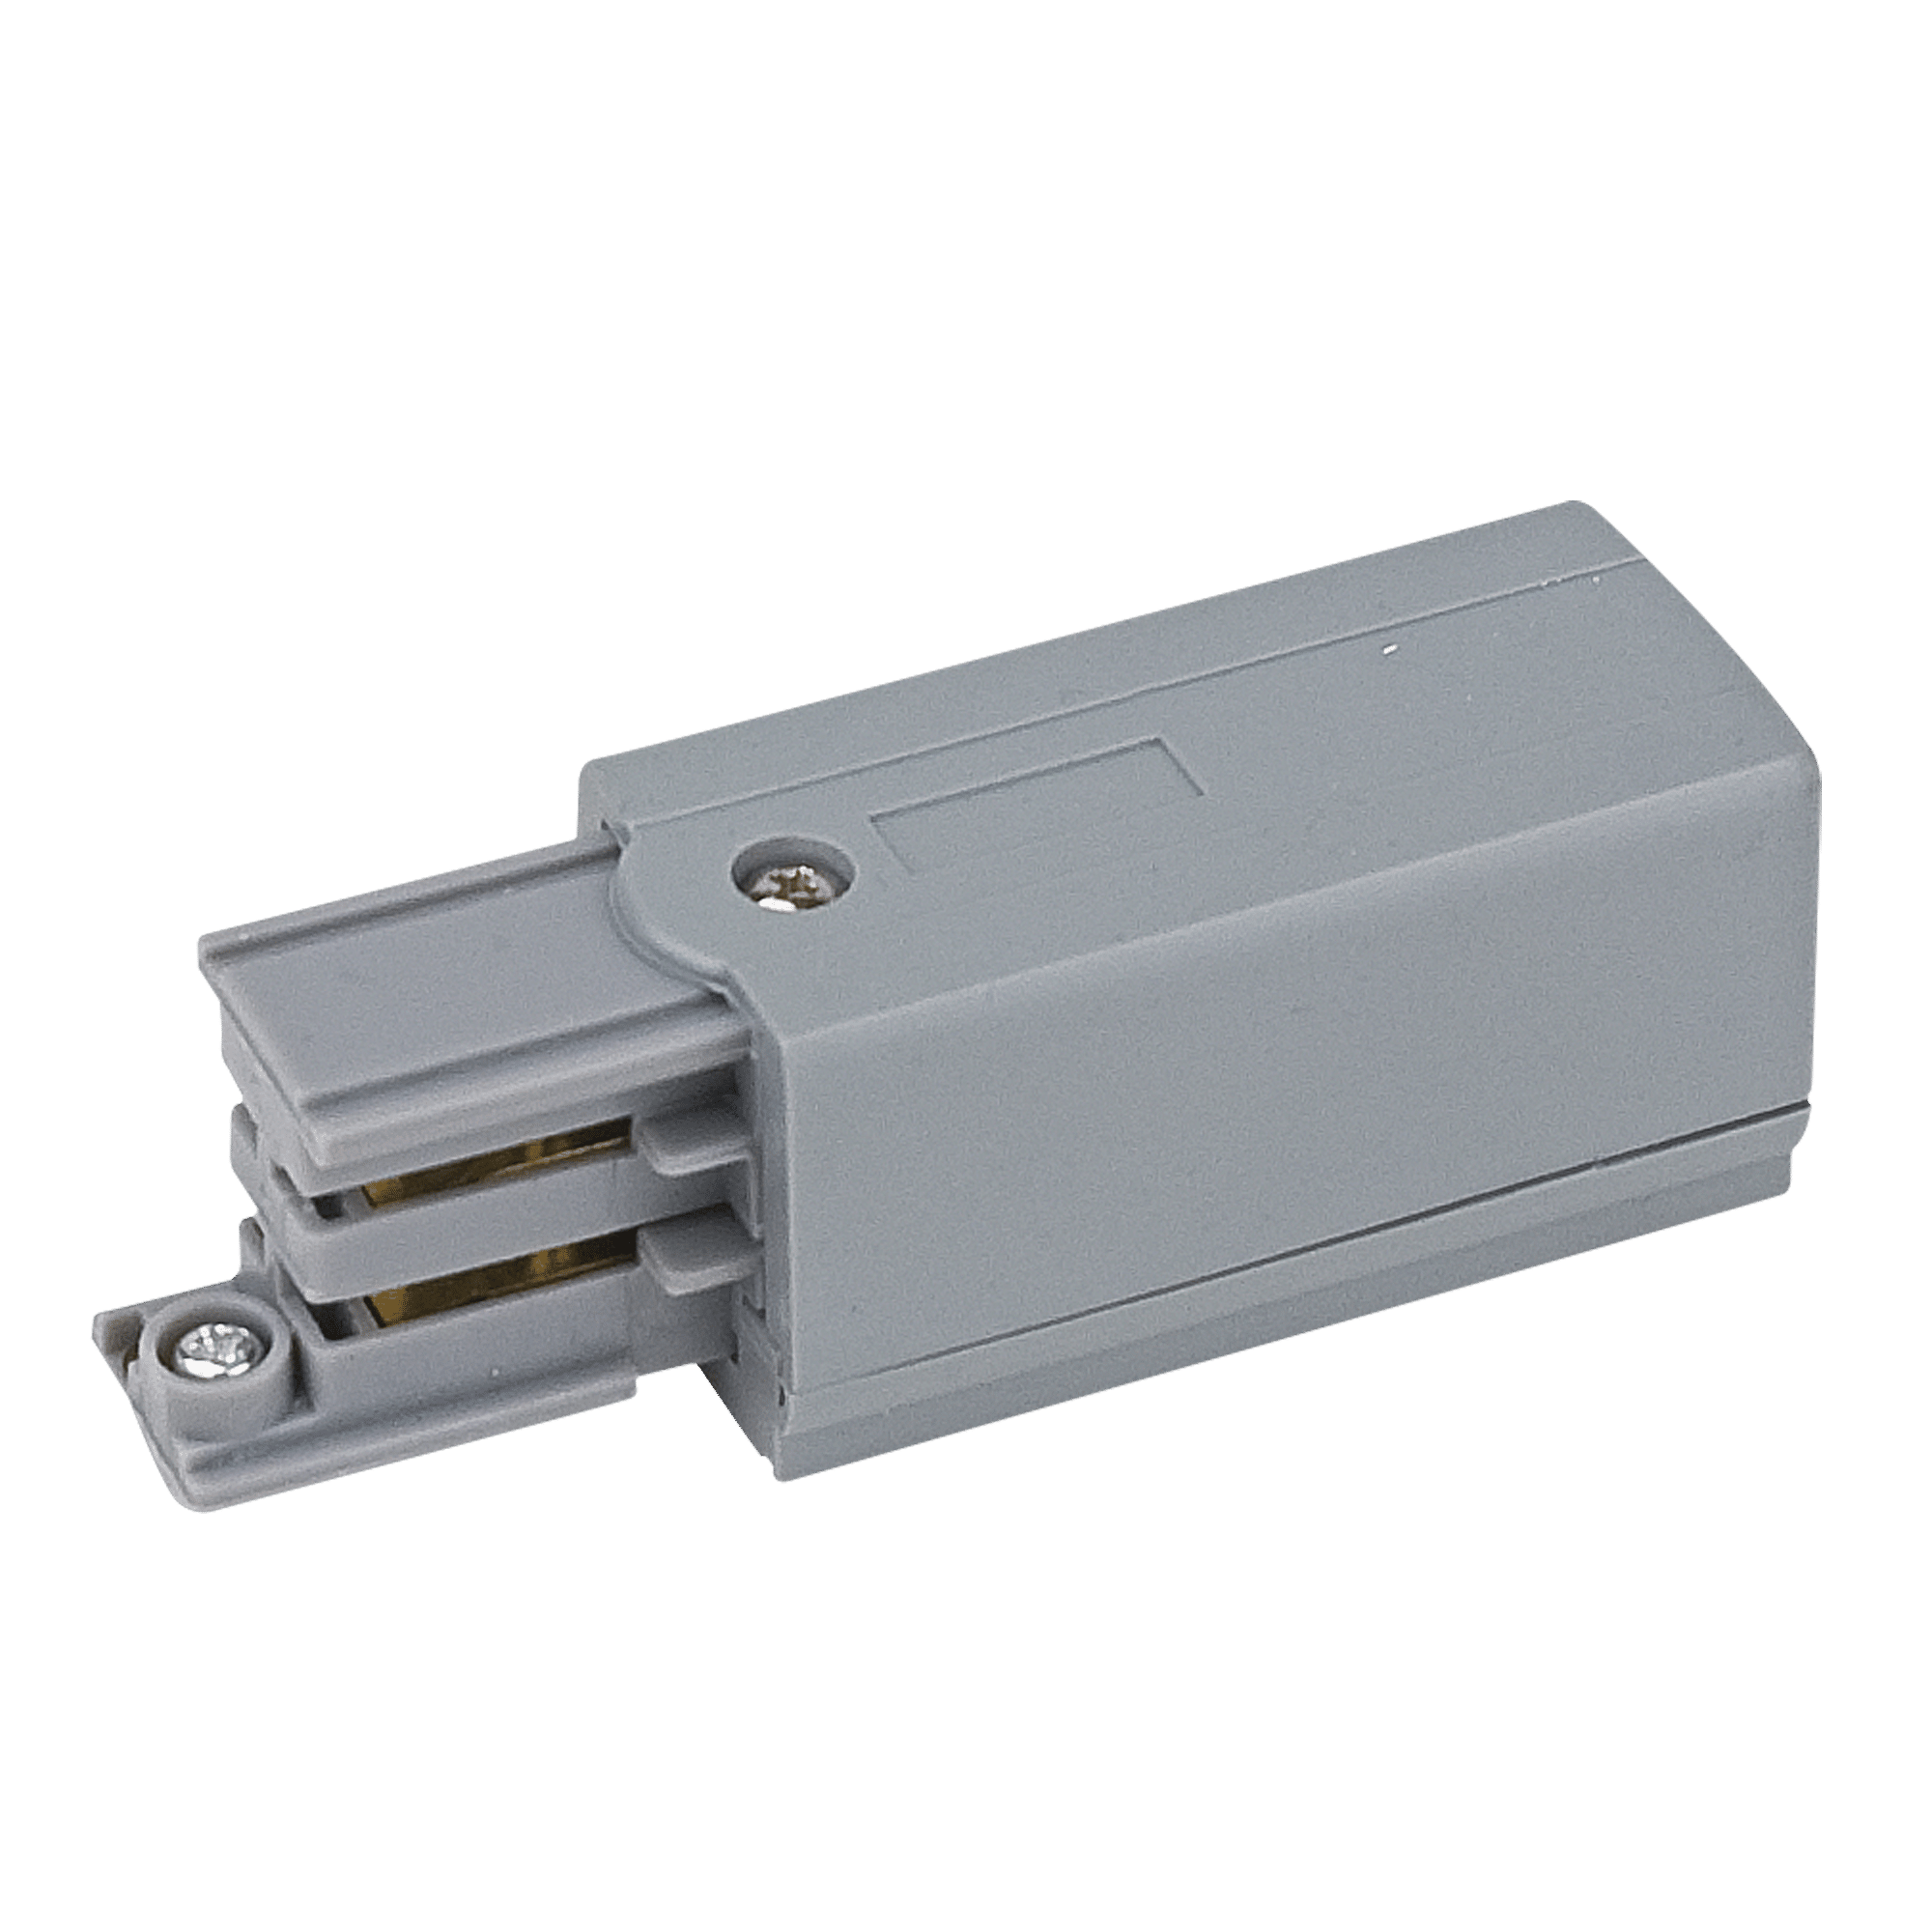 3-Phase Right Feed-In Connector - Onlinediscowinkel.nl